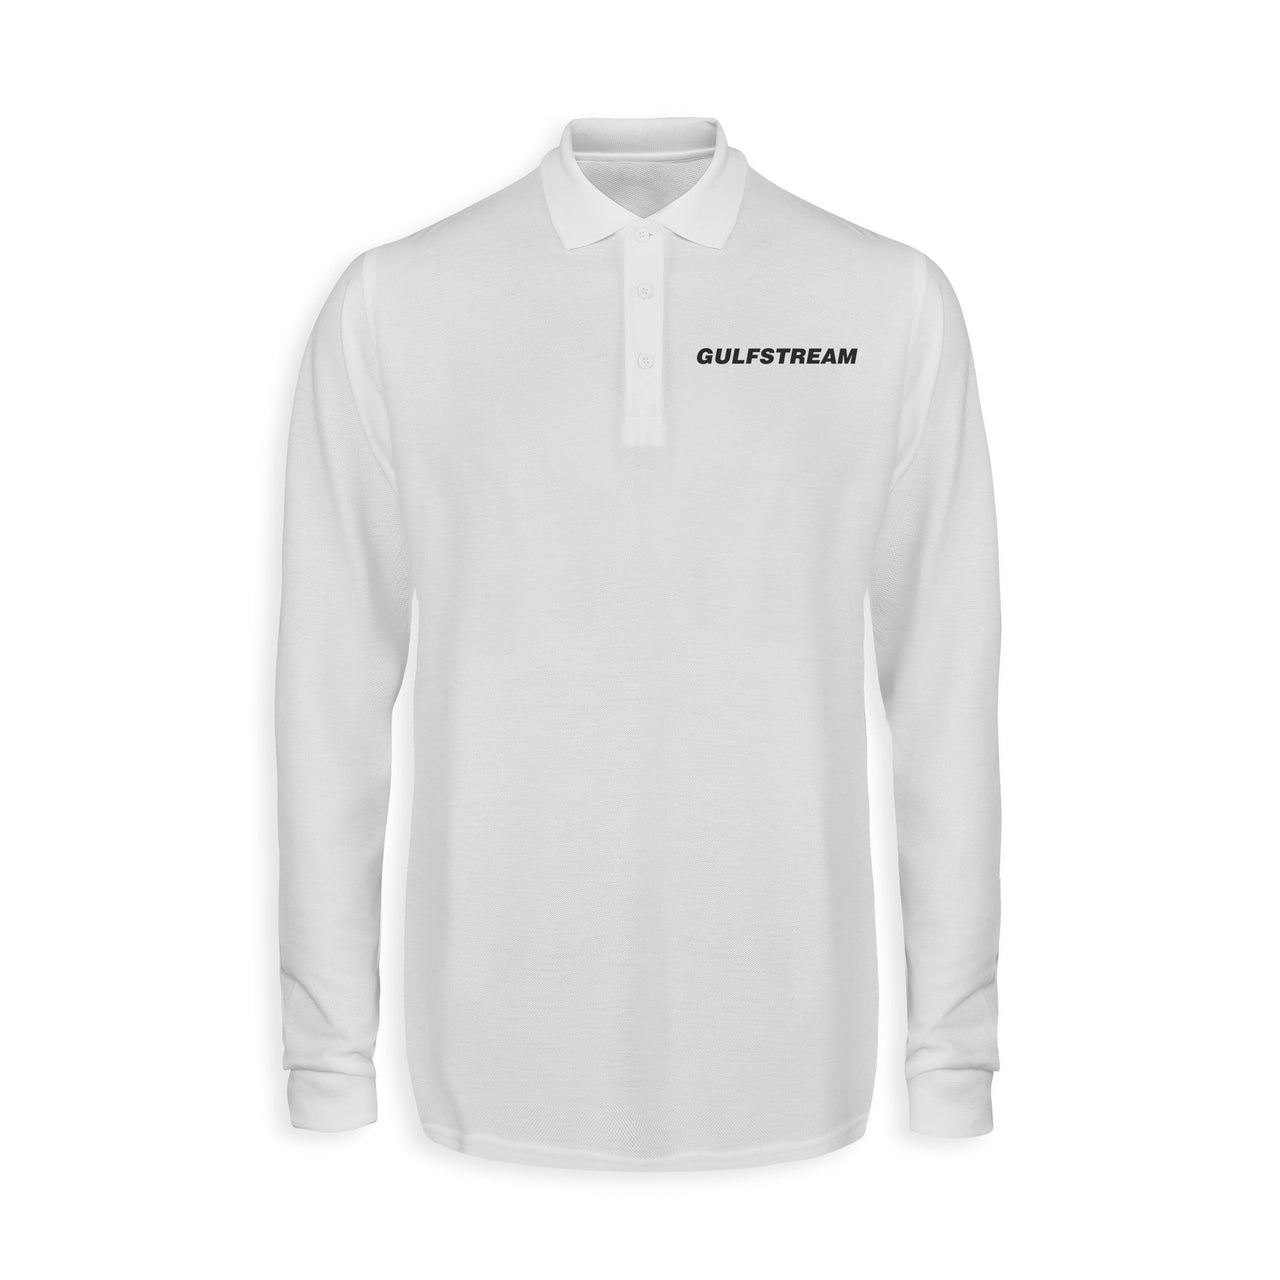 Gulfstream & Text Designed Long Sleeve Polo T-Shirts